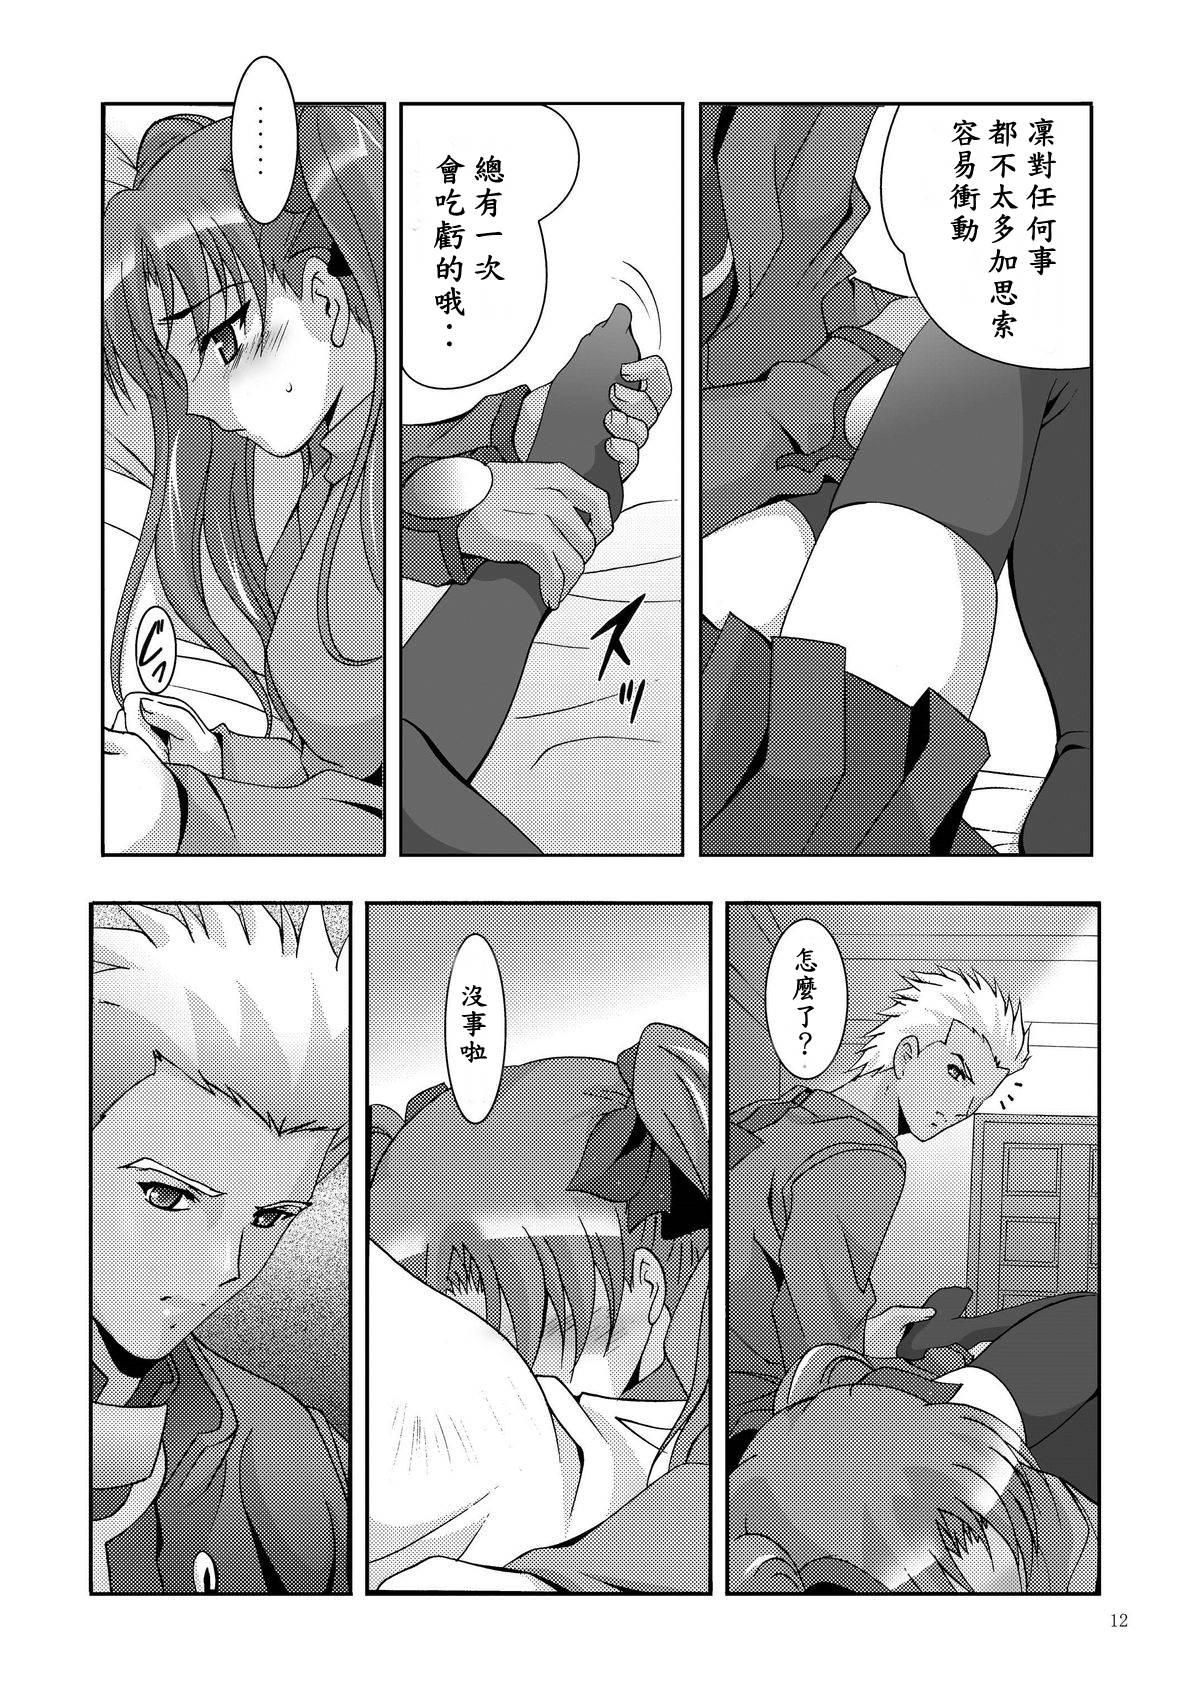 Bulge MOUSOU THEATER 19 - Fate stay night Pain - Page 10